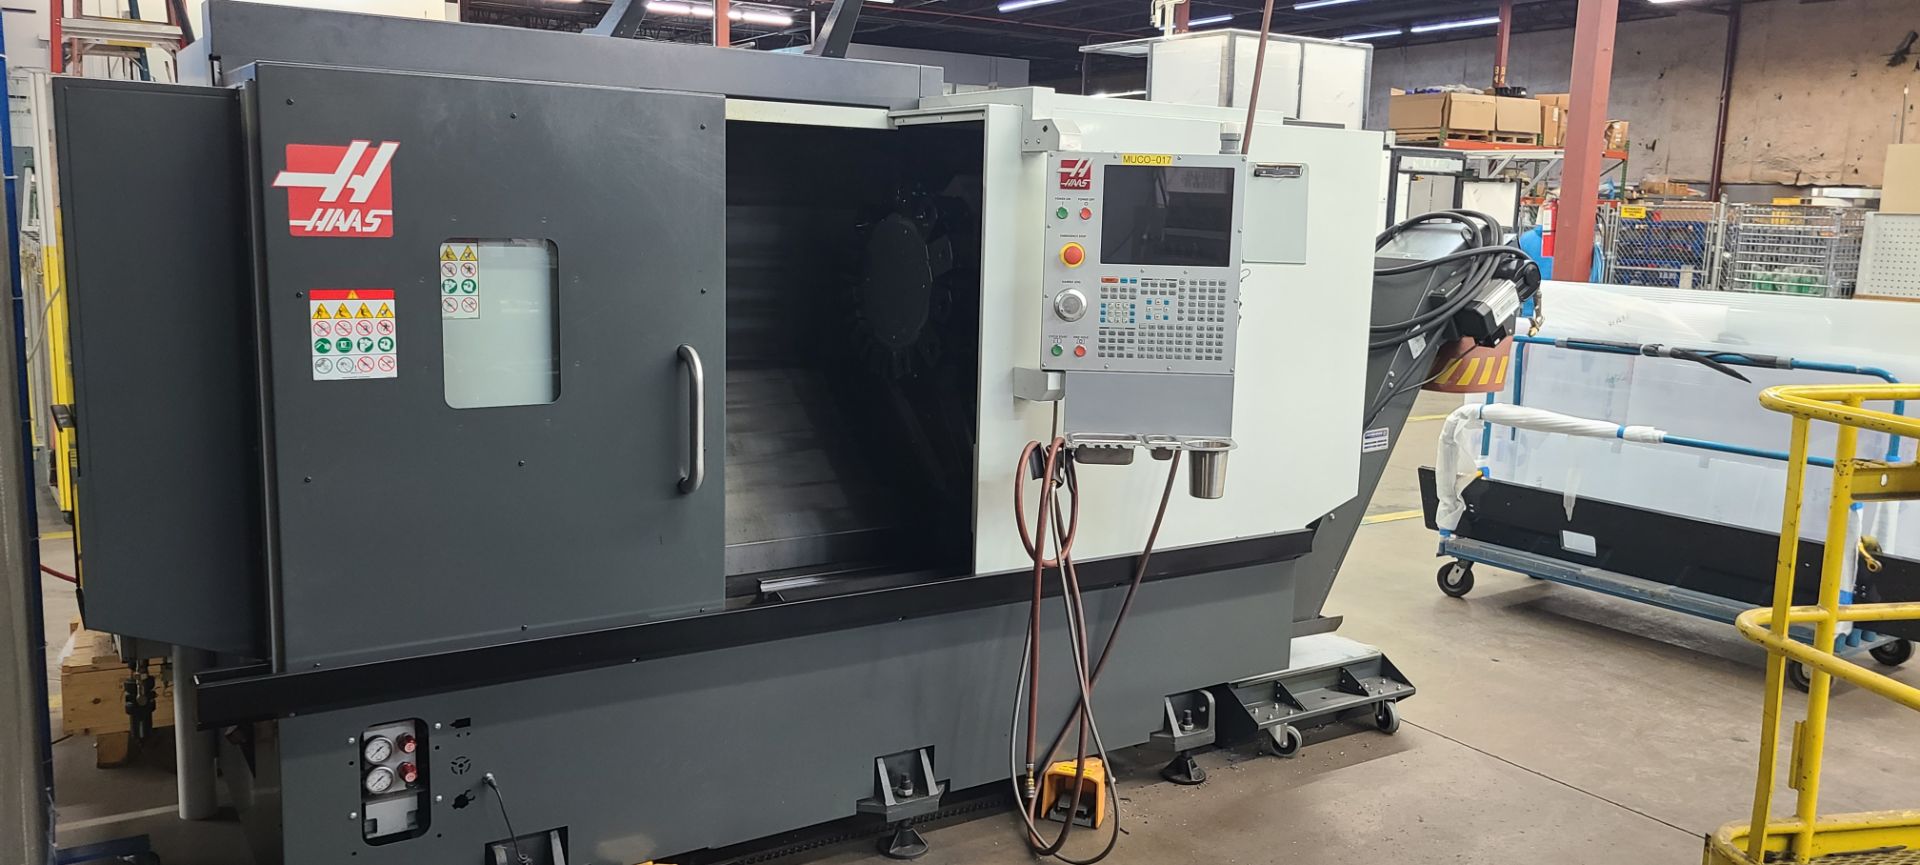 2021 HAAS ST-35Y CNC TURNING CENTER, LIVE MILLING, 12" CHUCK, MAX PART SWING 21" - Image 17 of 21